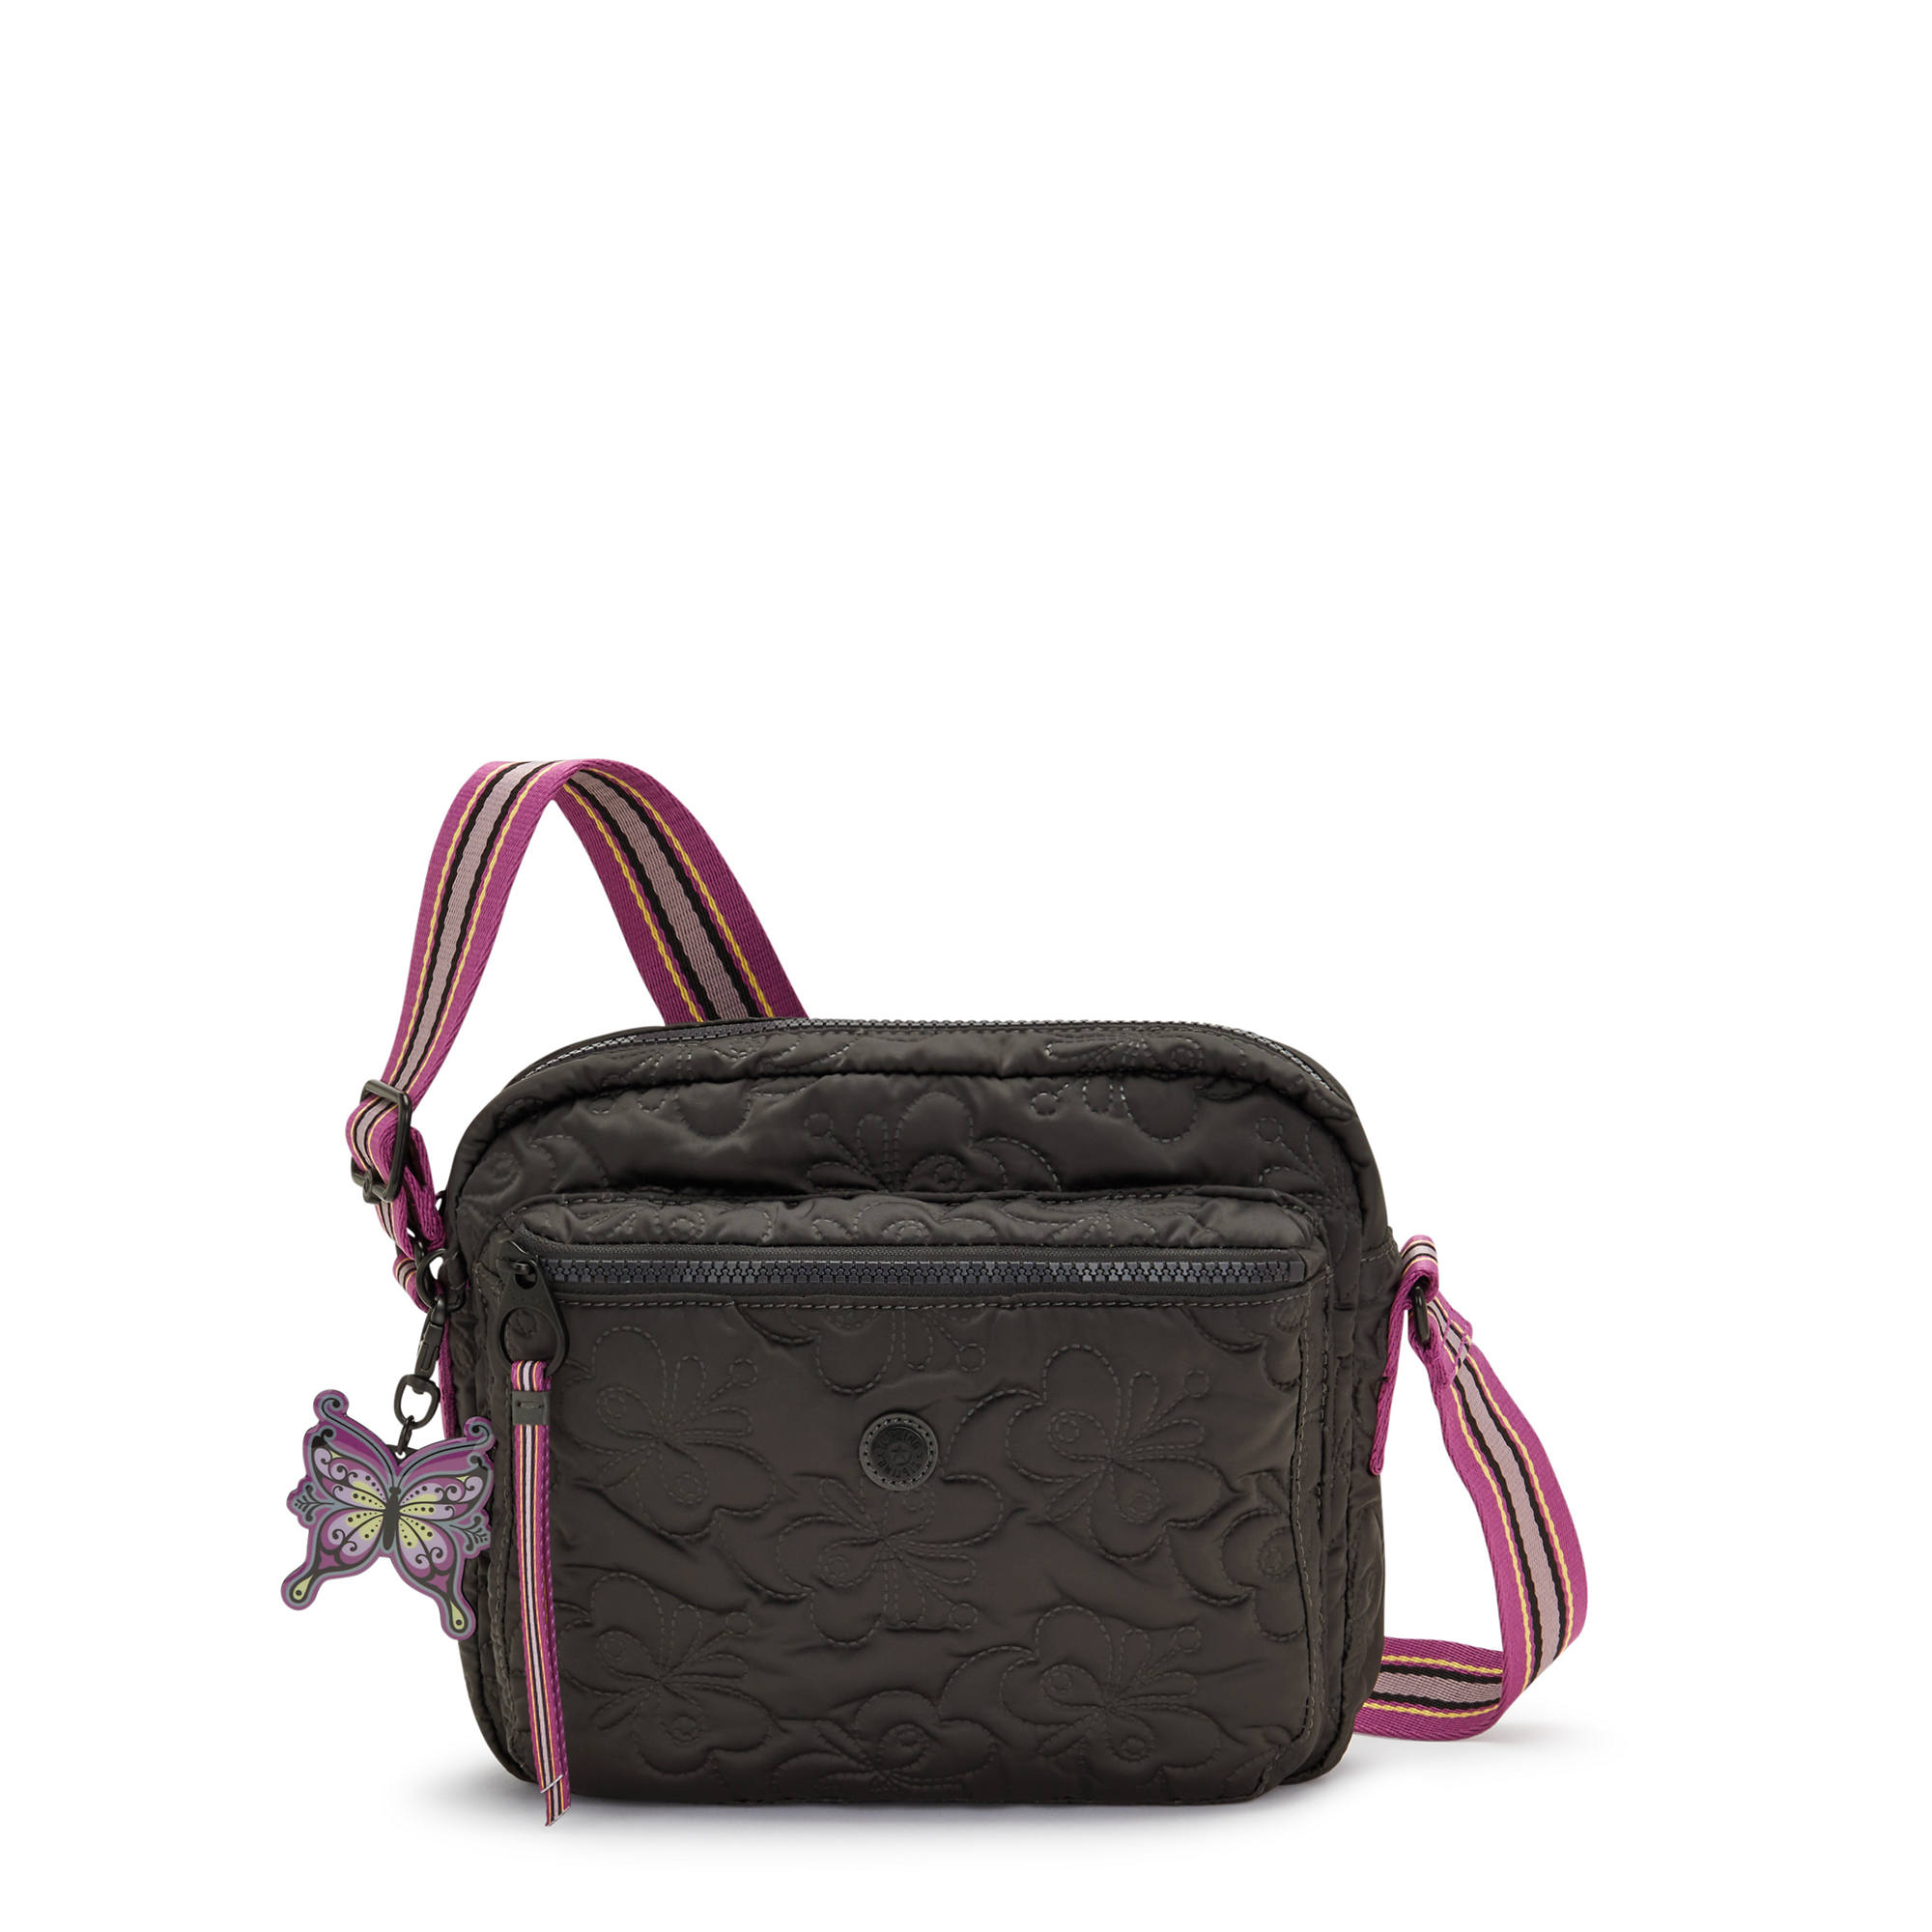 METRO CITY SLING BAG with FREE Anna Sui Coin Purse